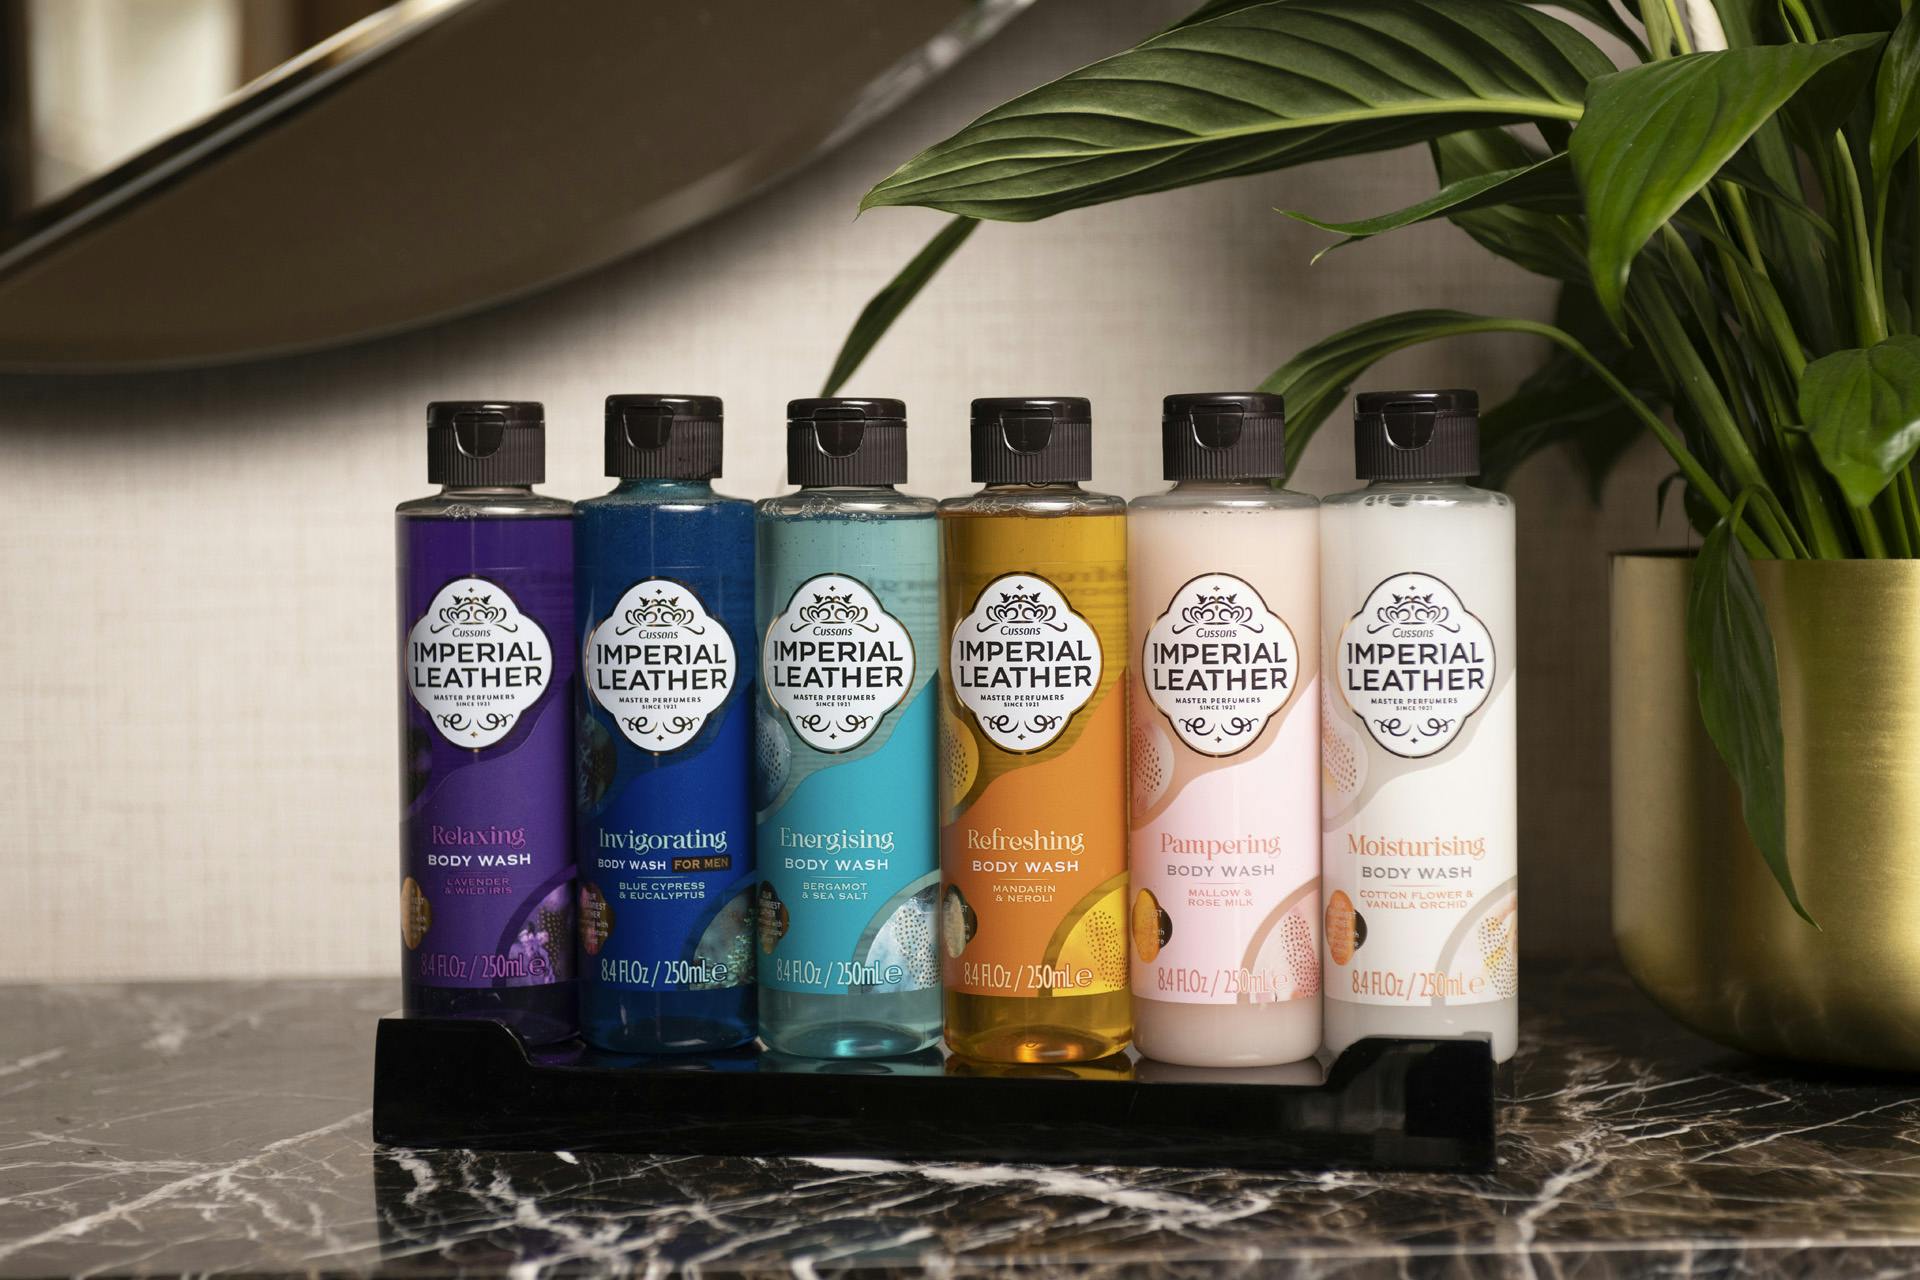 Bottles of Imperial Leather body wash 